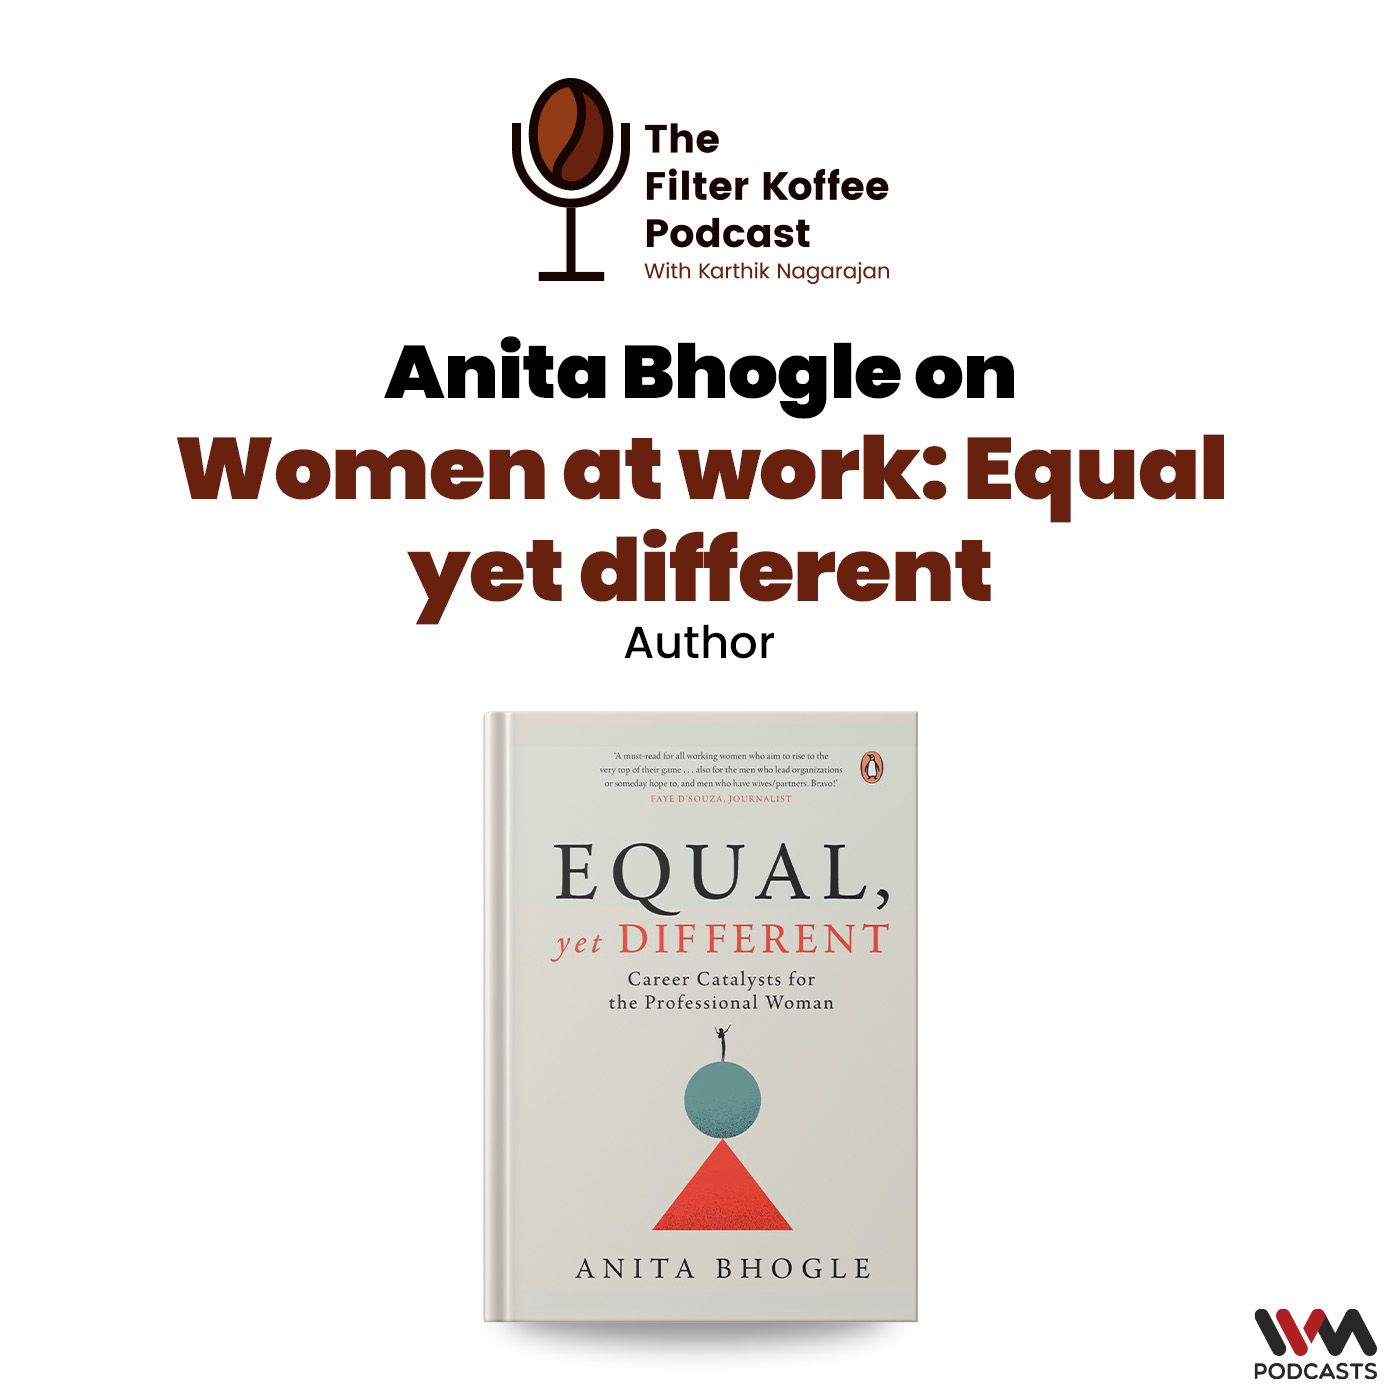 Anita Bhogle on Women at Work: Equal Yet Different